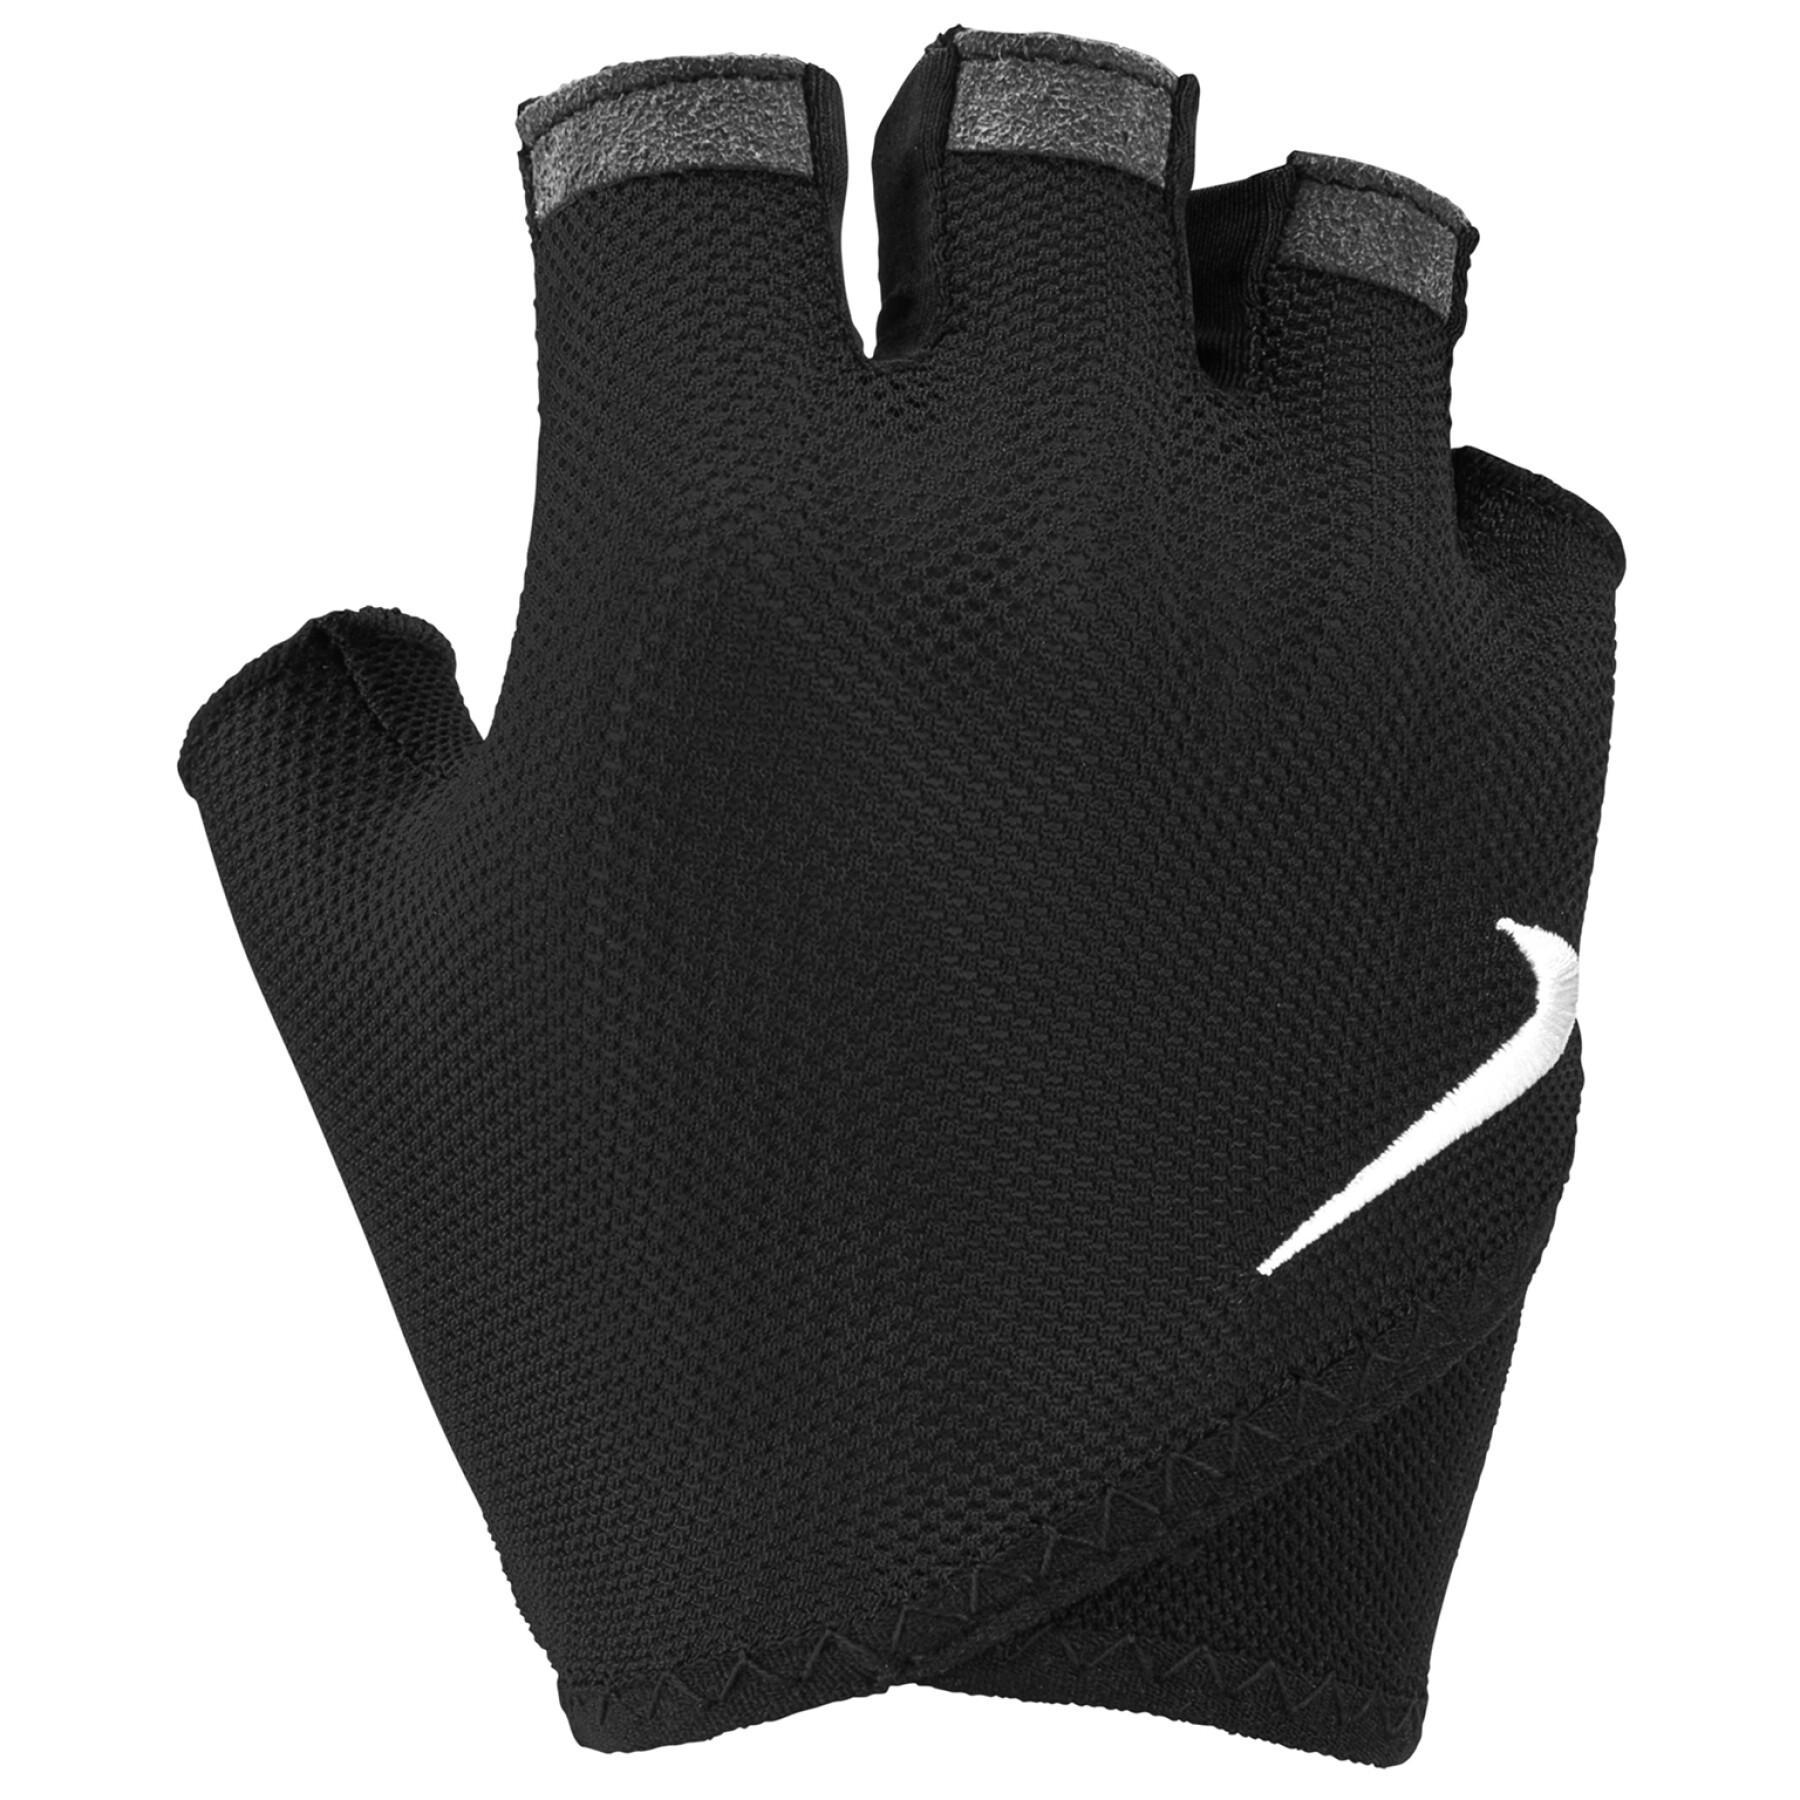 Gants mitaine Nike Essential fitness - Nike - Marques - Textile